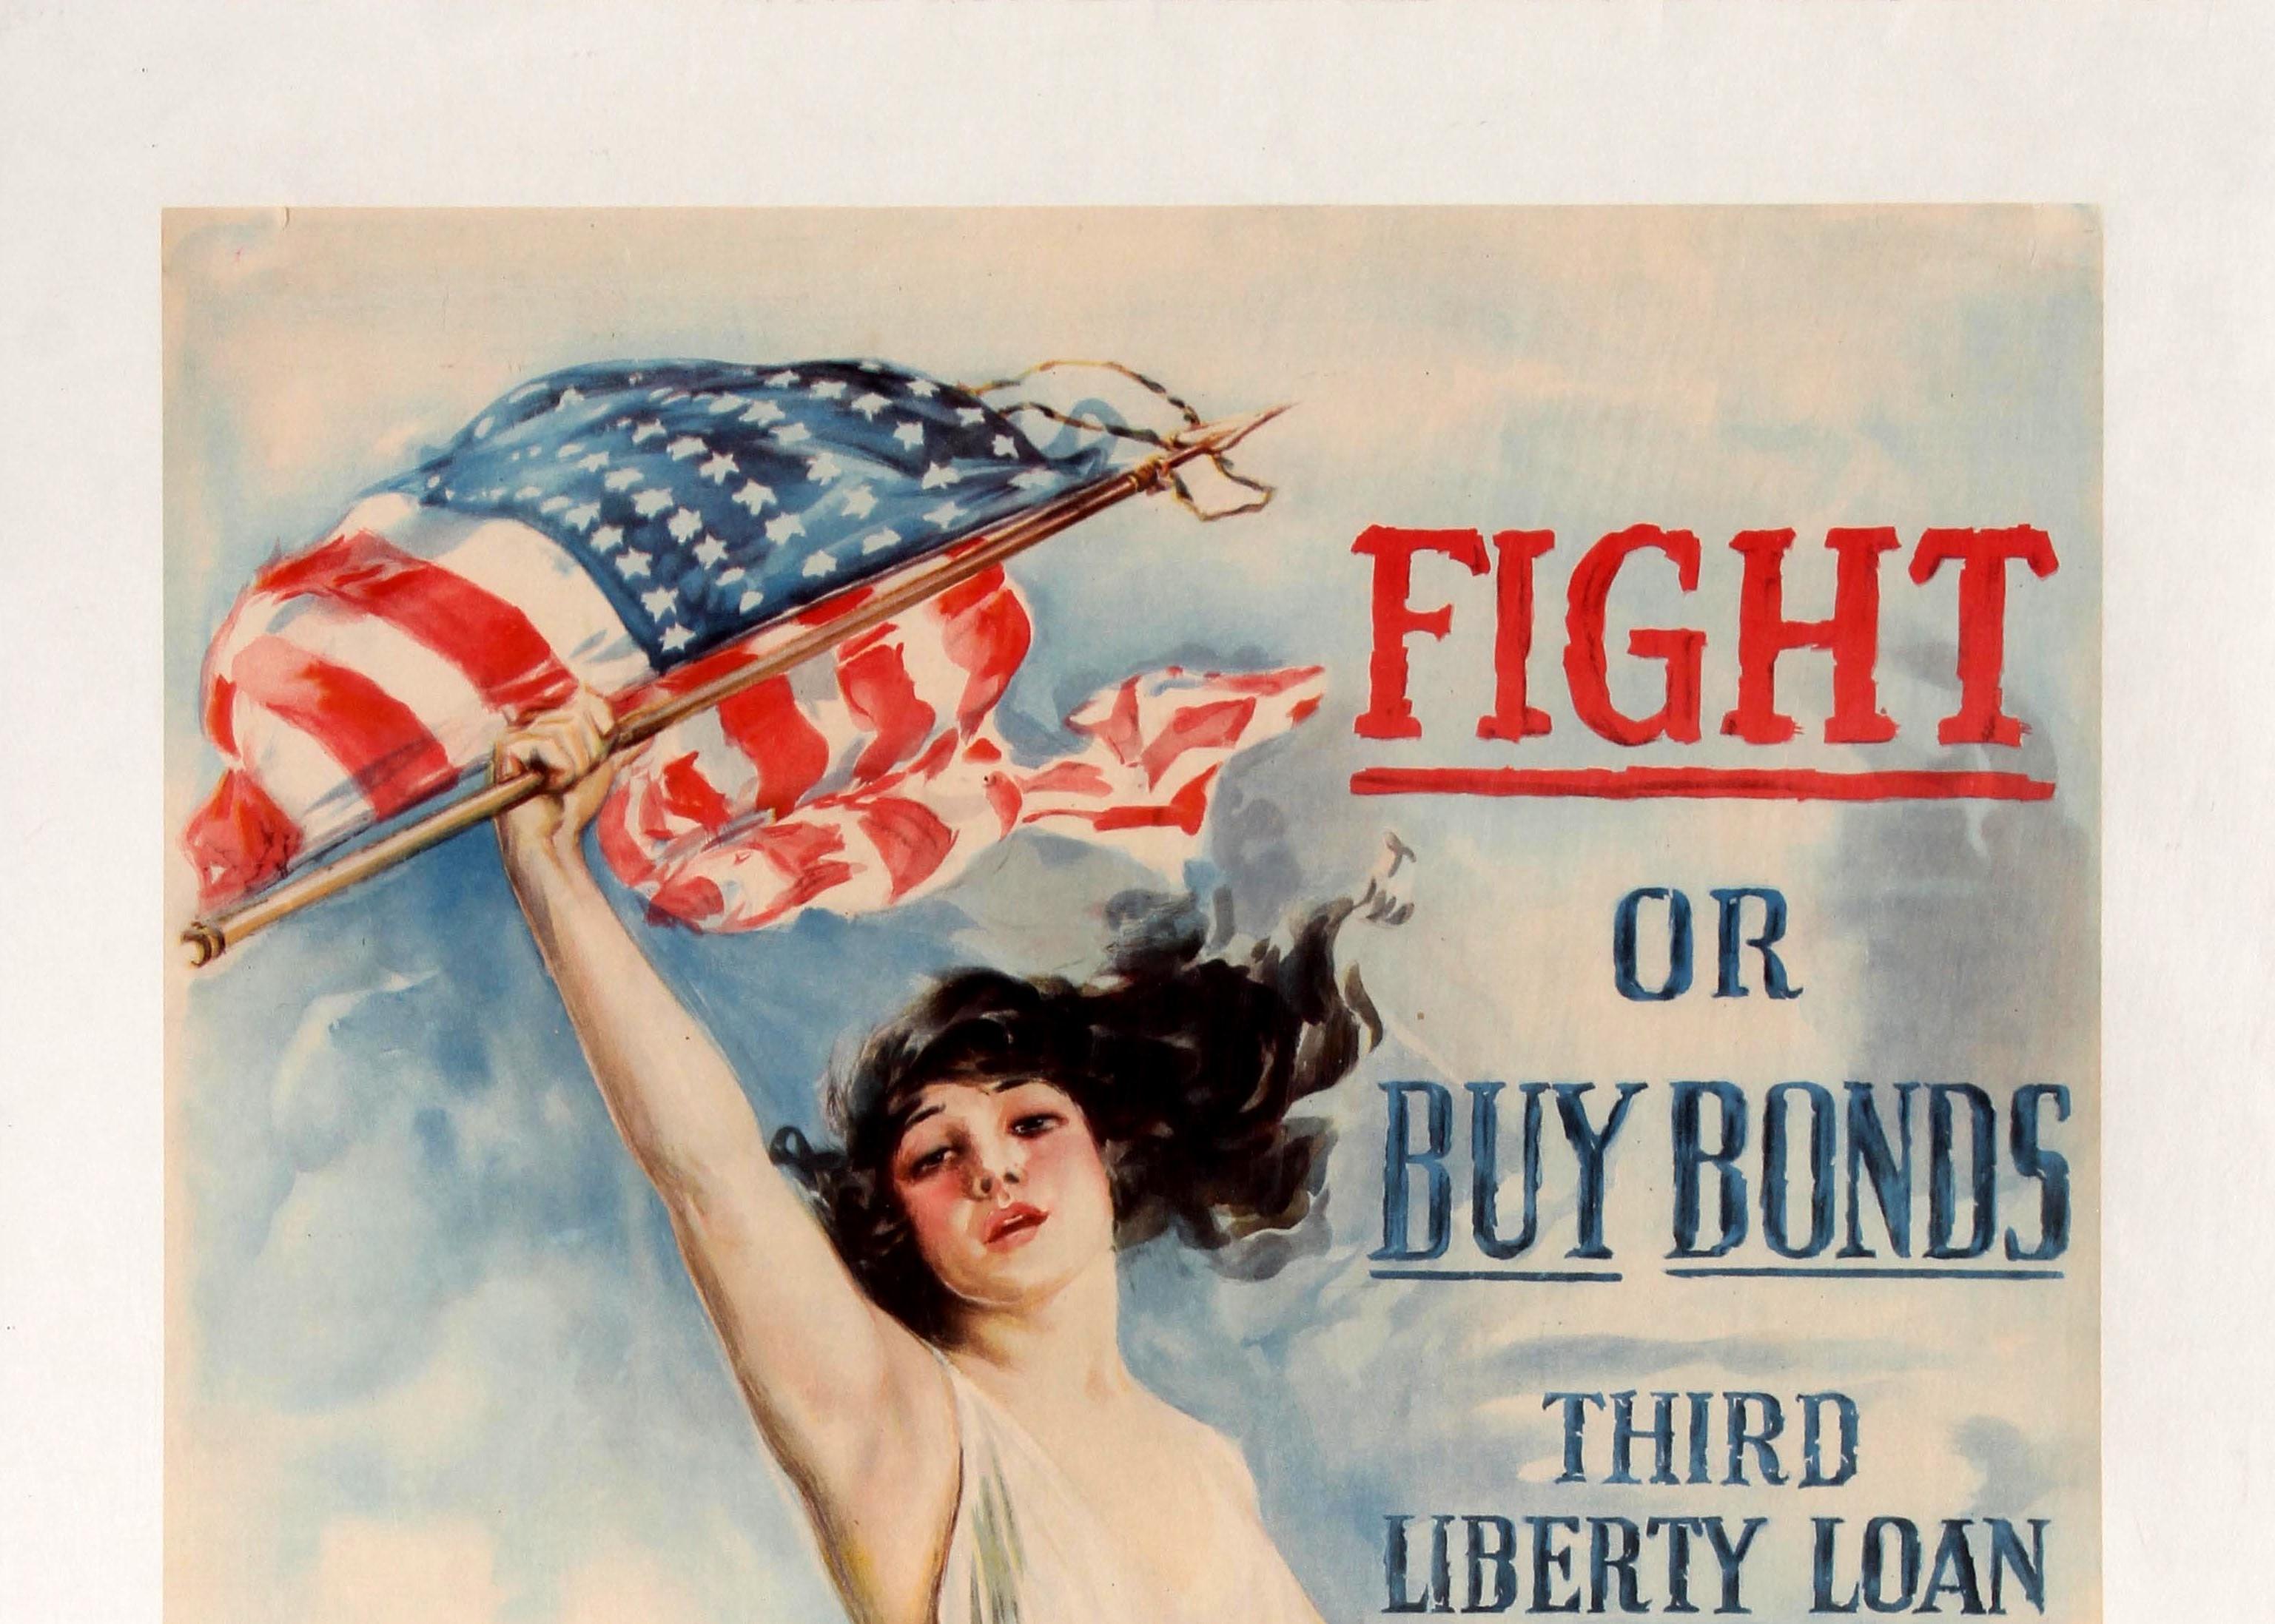 Original Antique WWI Poster Fight or Buy Bonds Third Liberty Loan 